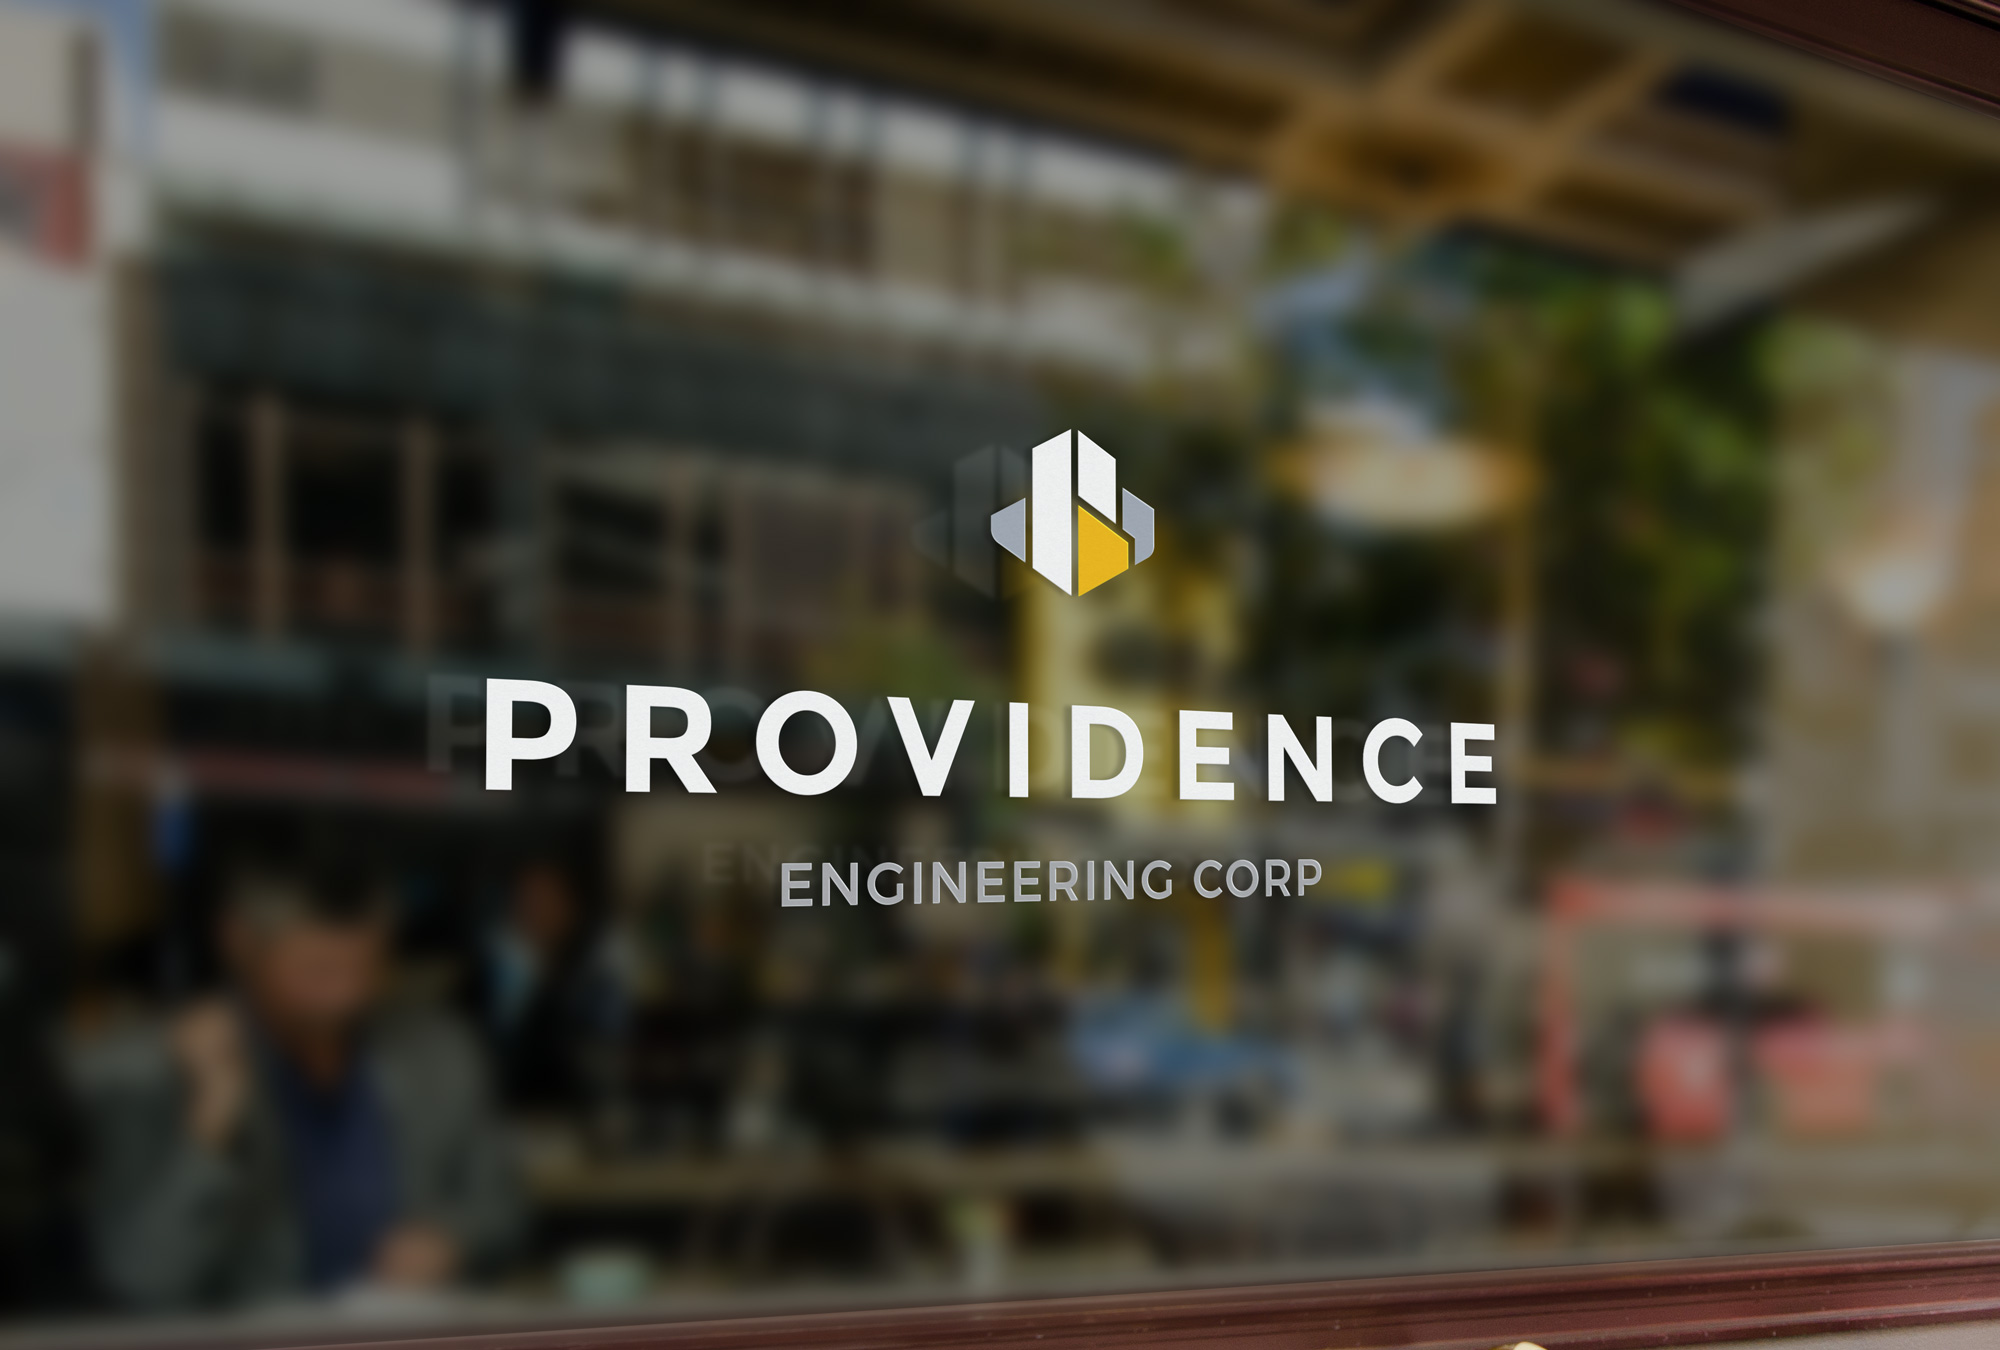 Providence Engineering - Glass Sign